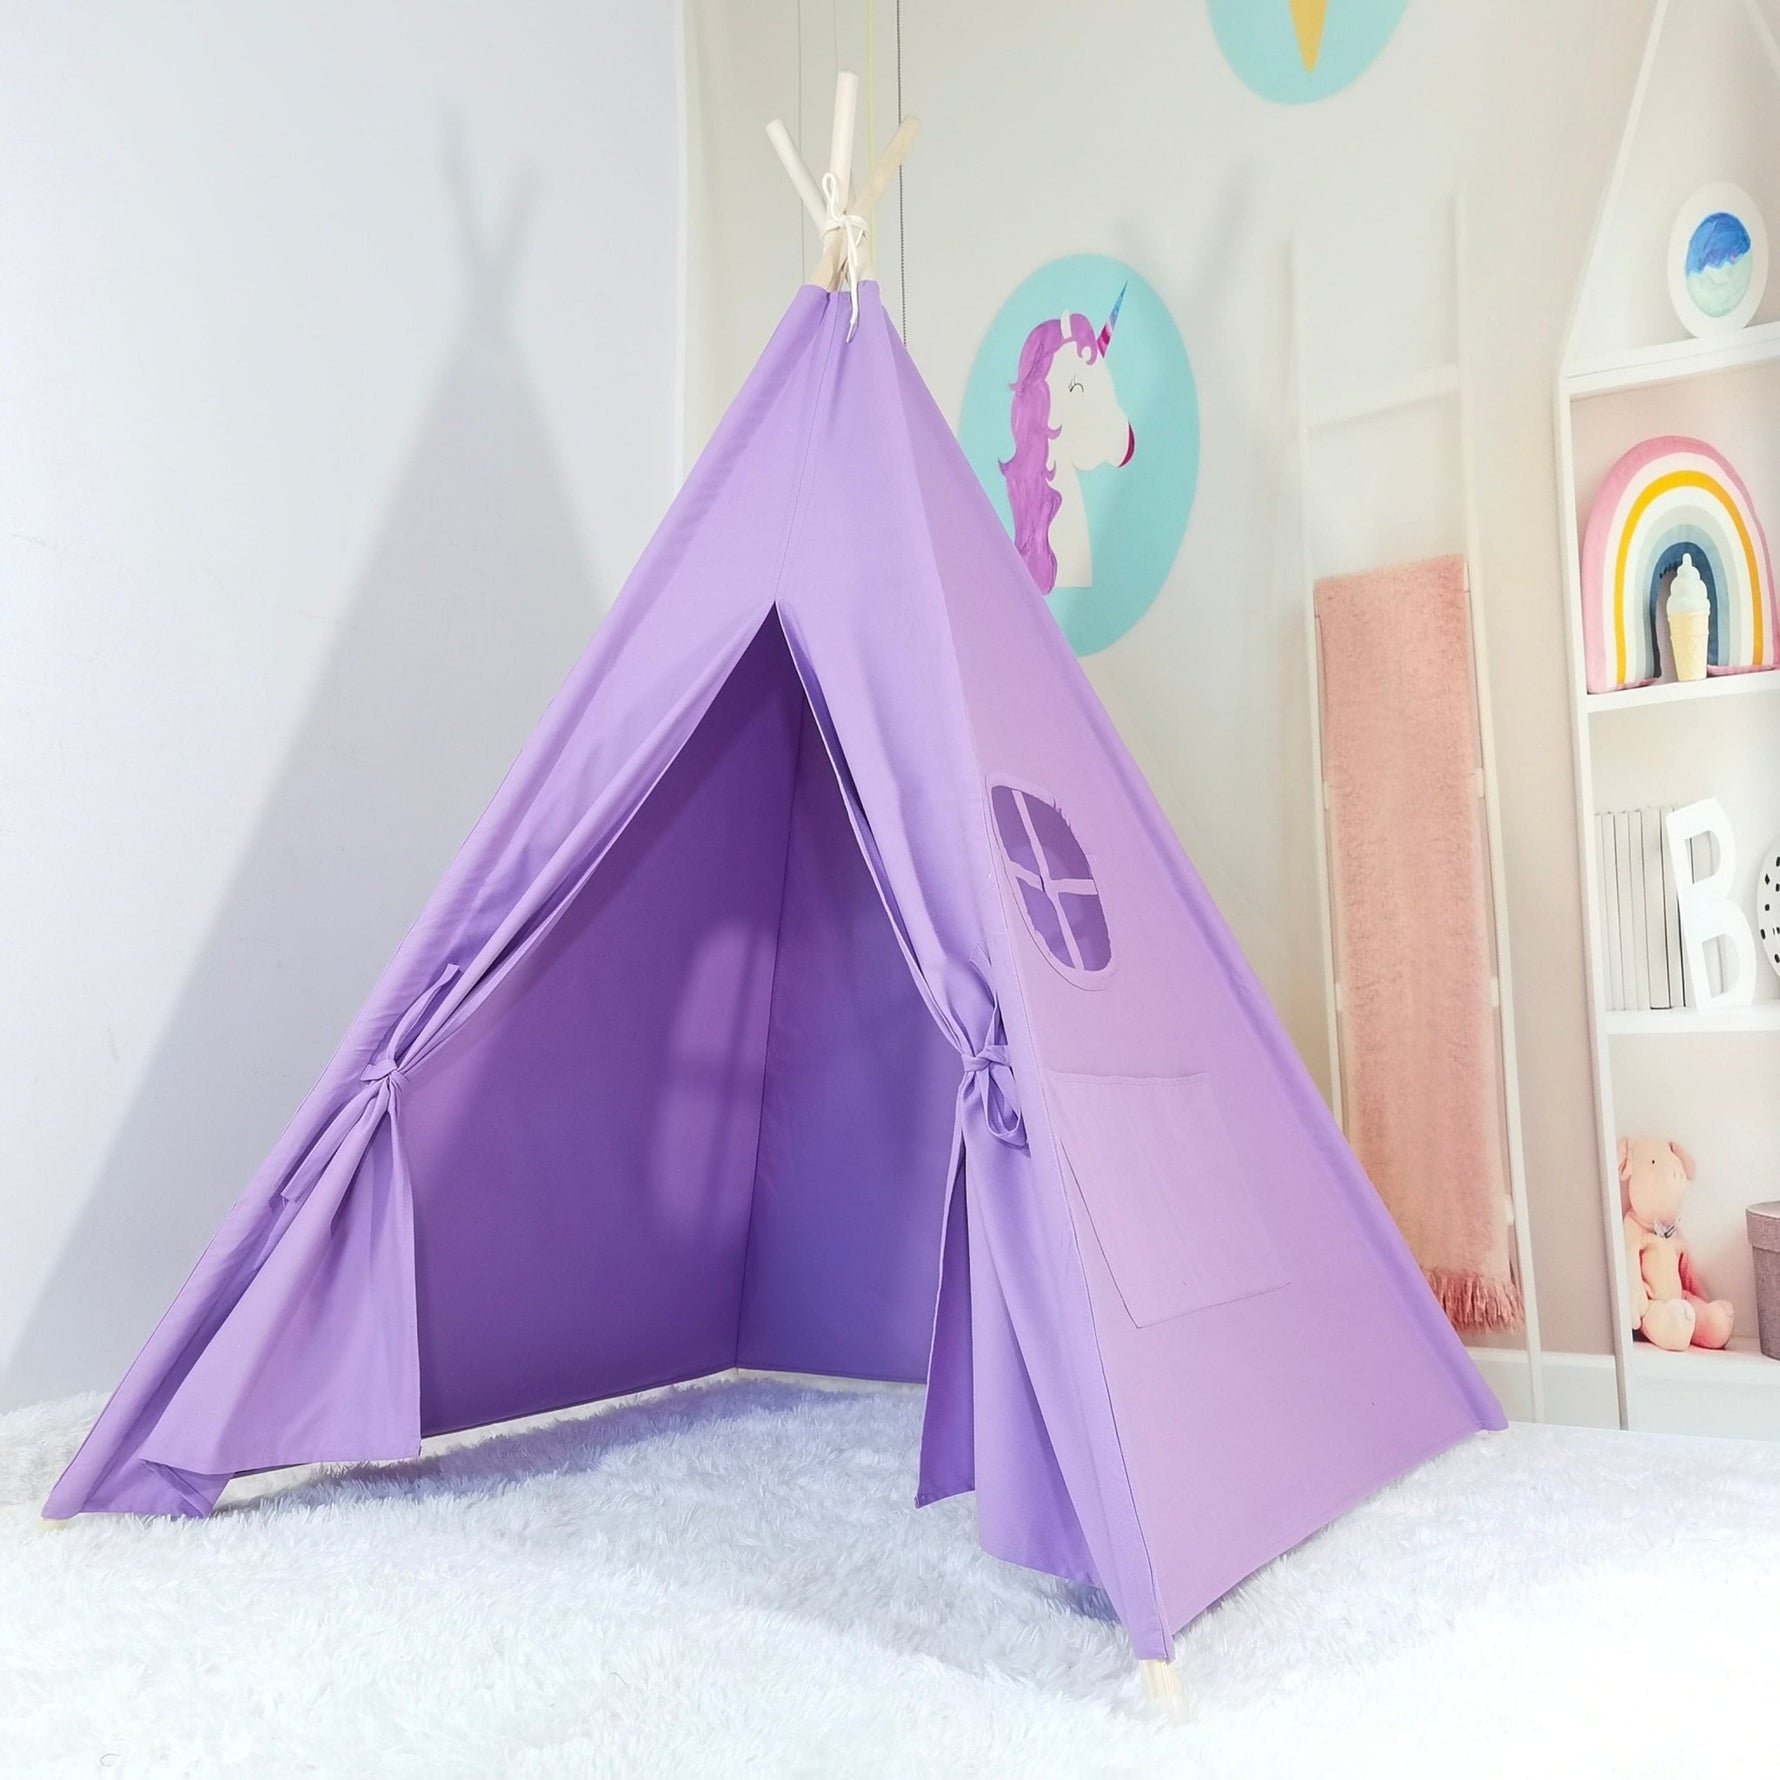 Lavender Kids Teepee Tent, Teepee Tents With Lights, Pyramid Tents